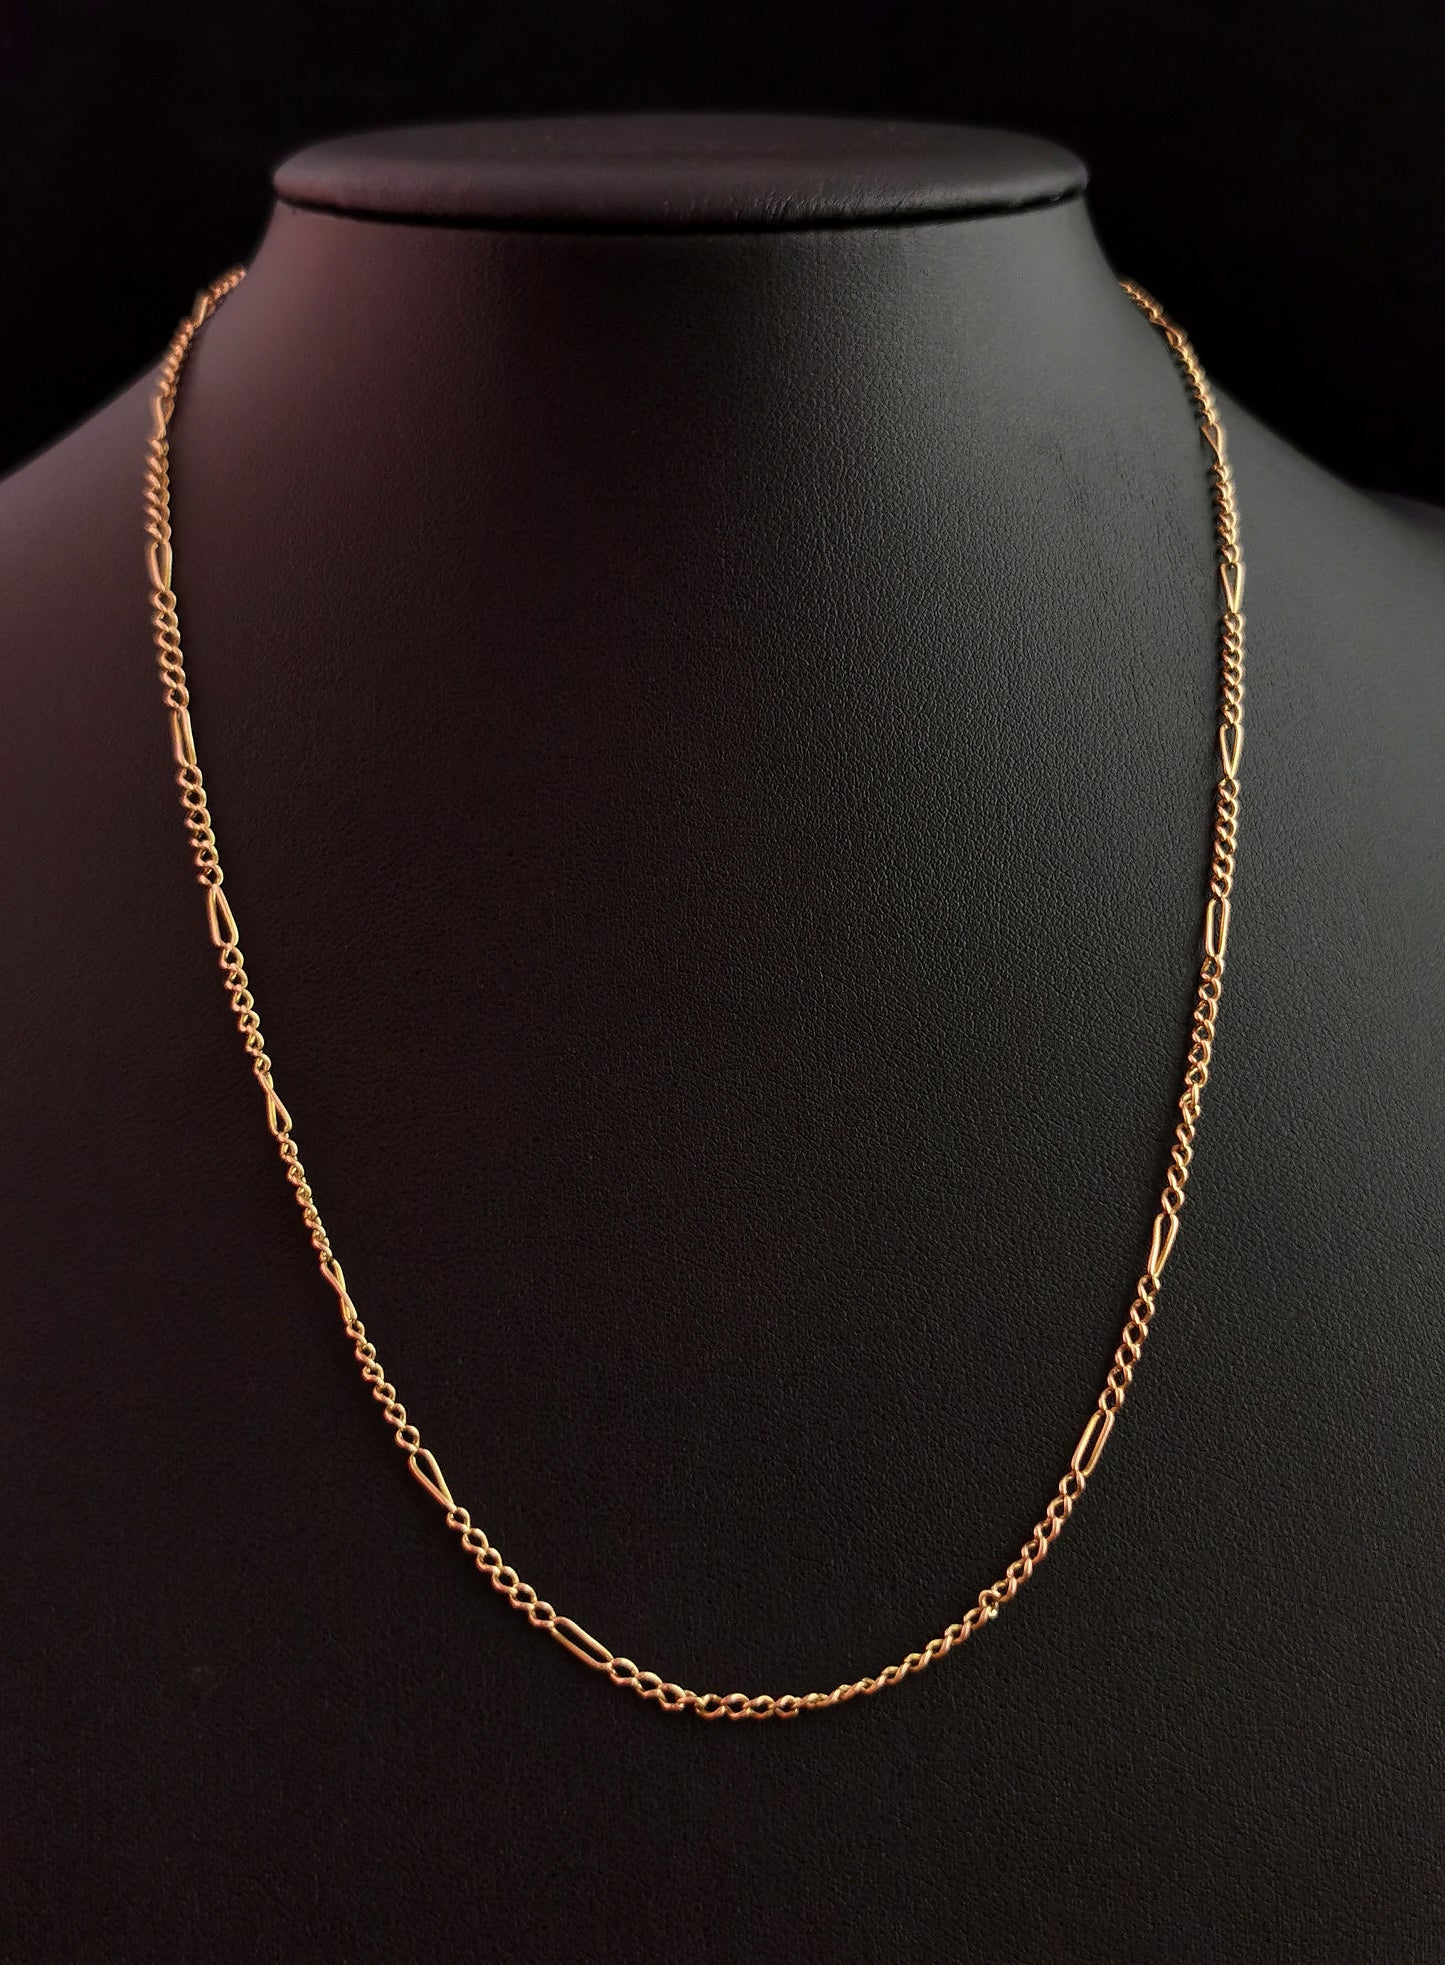 Antique 9ct gold fancy link figaro chain necklace